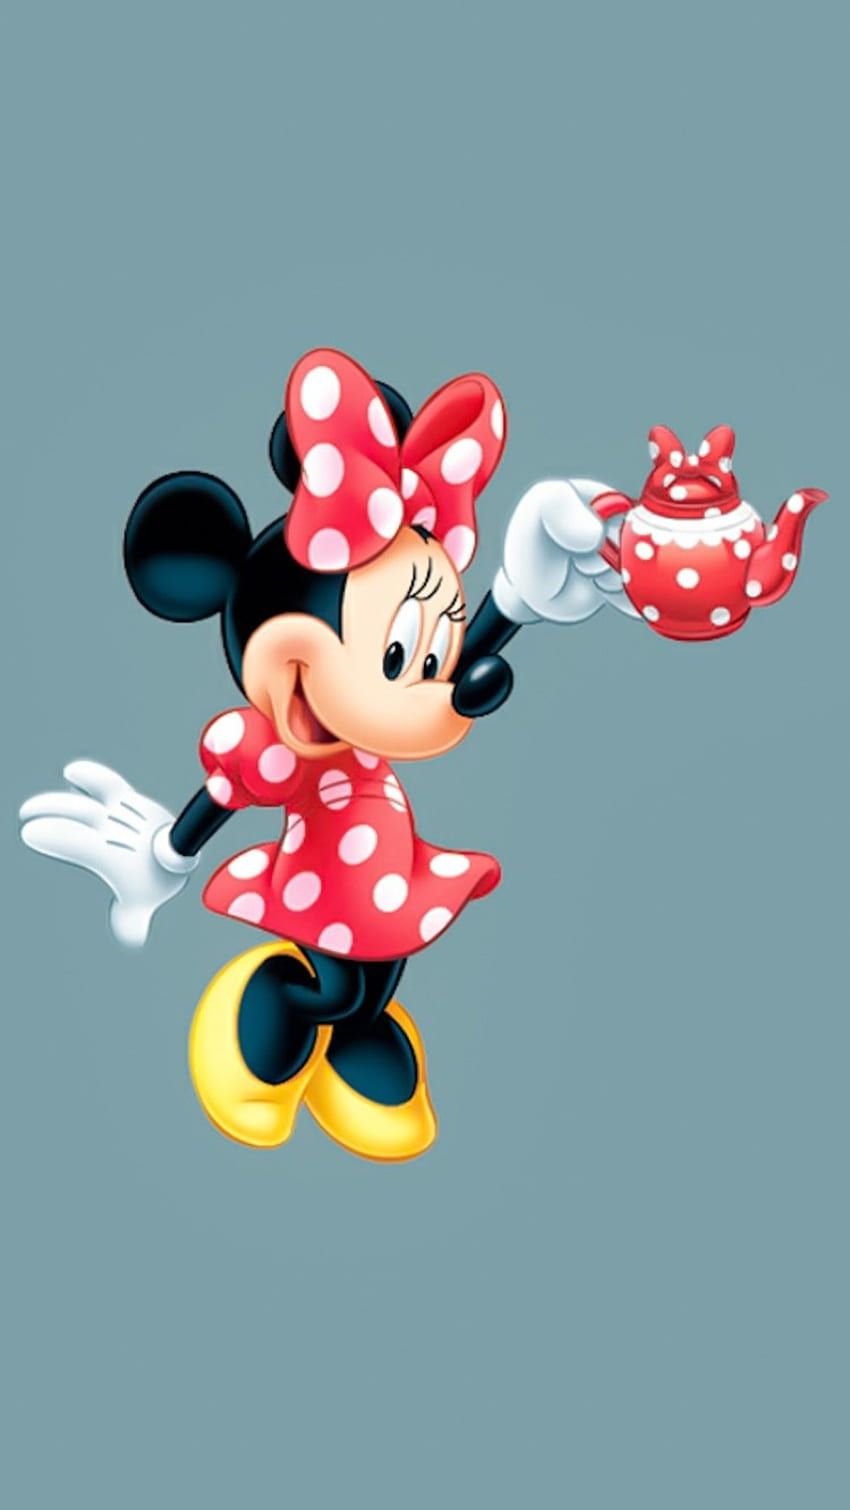 Mickey Mouse Disney Aesthetic : Minnie Mouse Red Polka Dot Dress, iPhone, Color Schemes, Red Mickey Mouse HD phone wallpaper